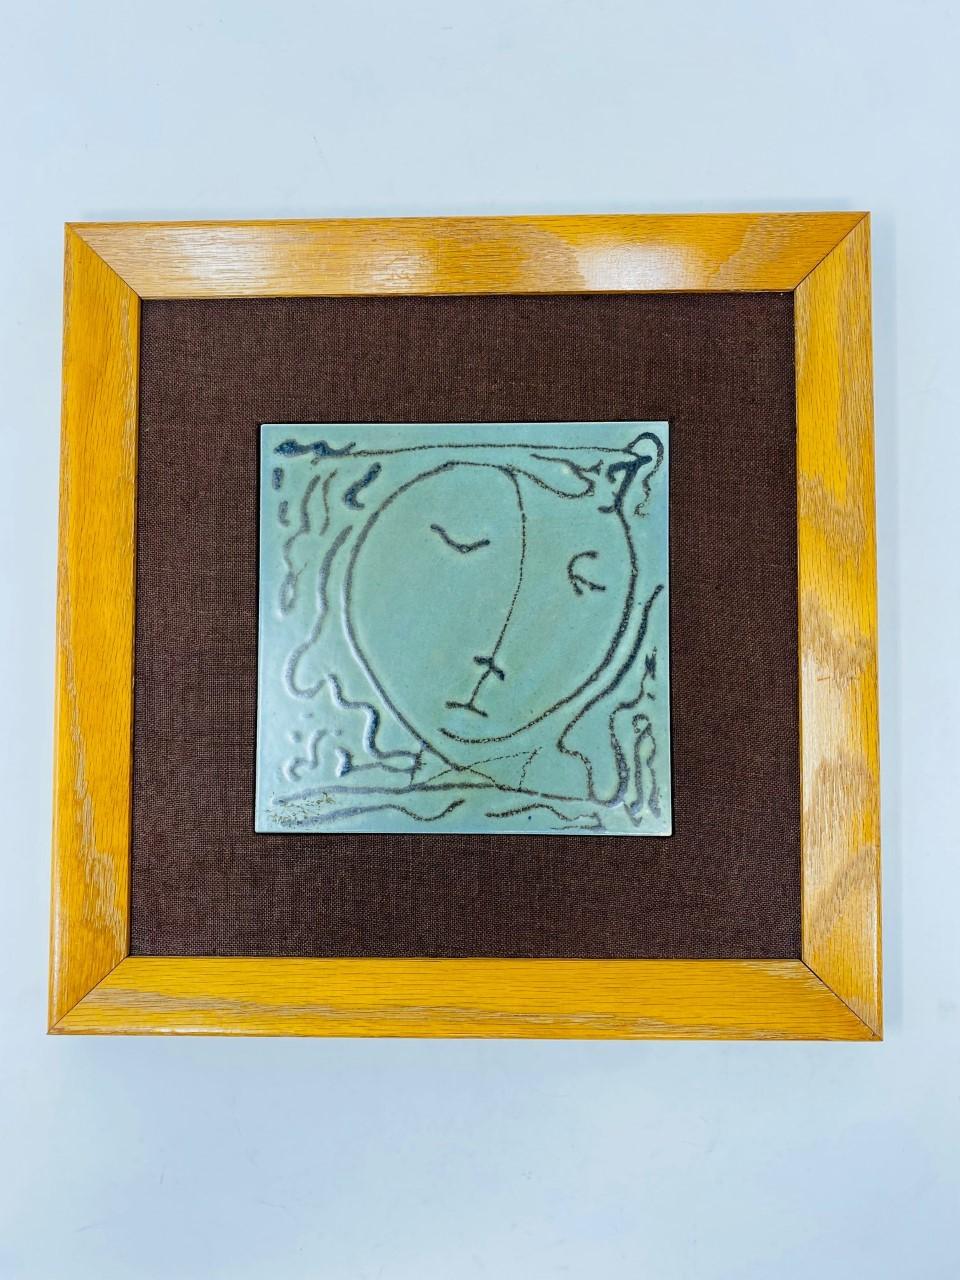 Beautiful tiles by American ceramic artist Harris G Strong. Harris G Strong stands for his iconic work in earthenware hand painted tiles. This set of 4 framed tiles with different themes, become cohesive as a group as they are beautifully executed